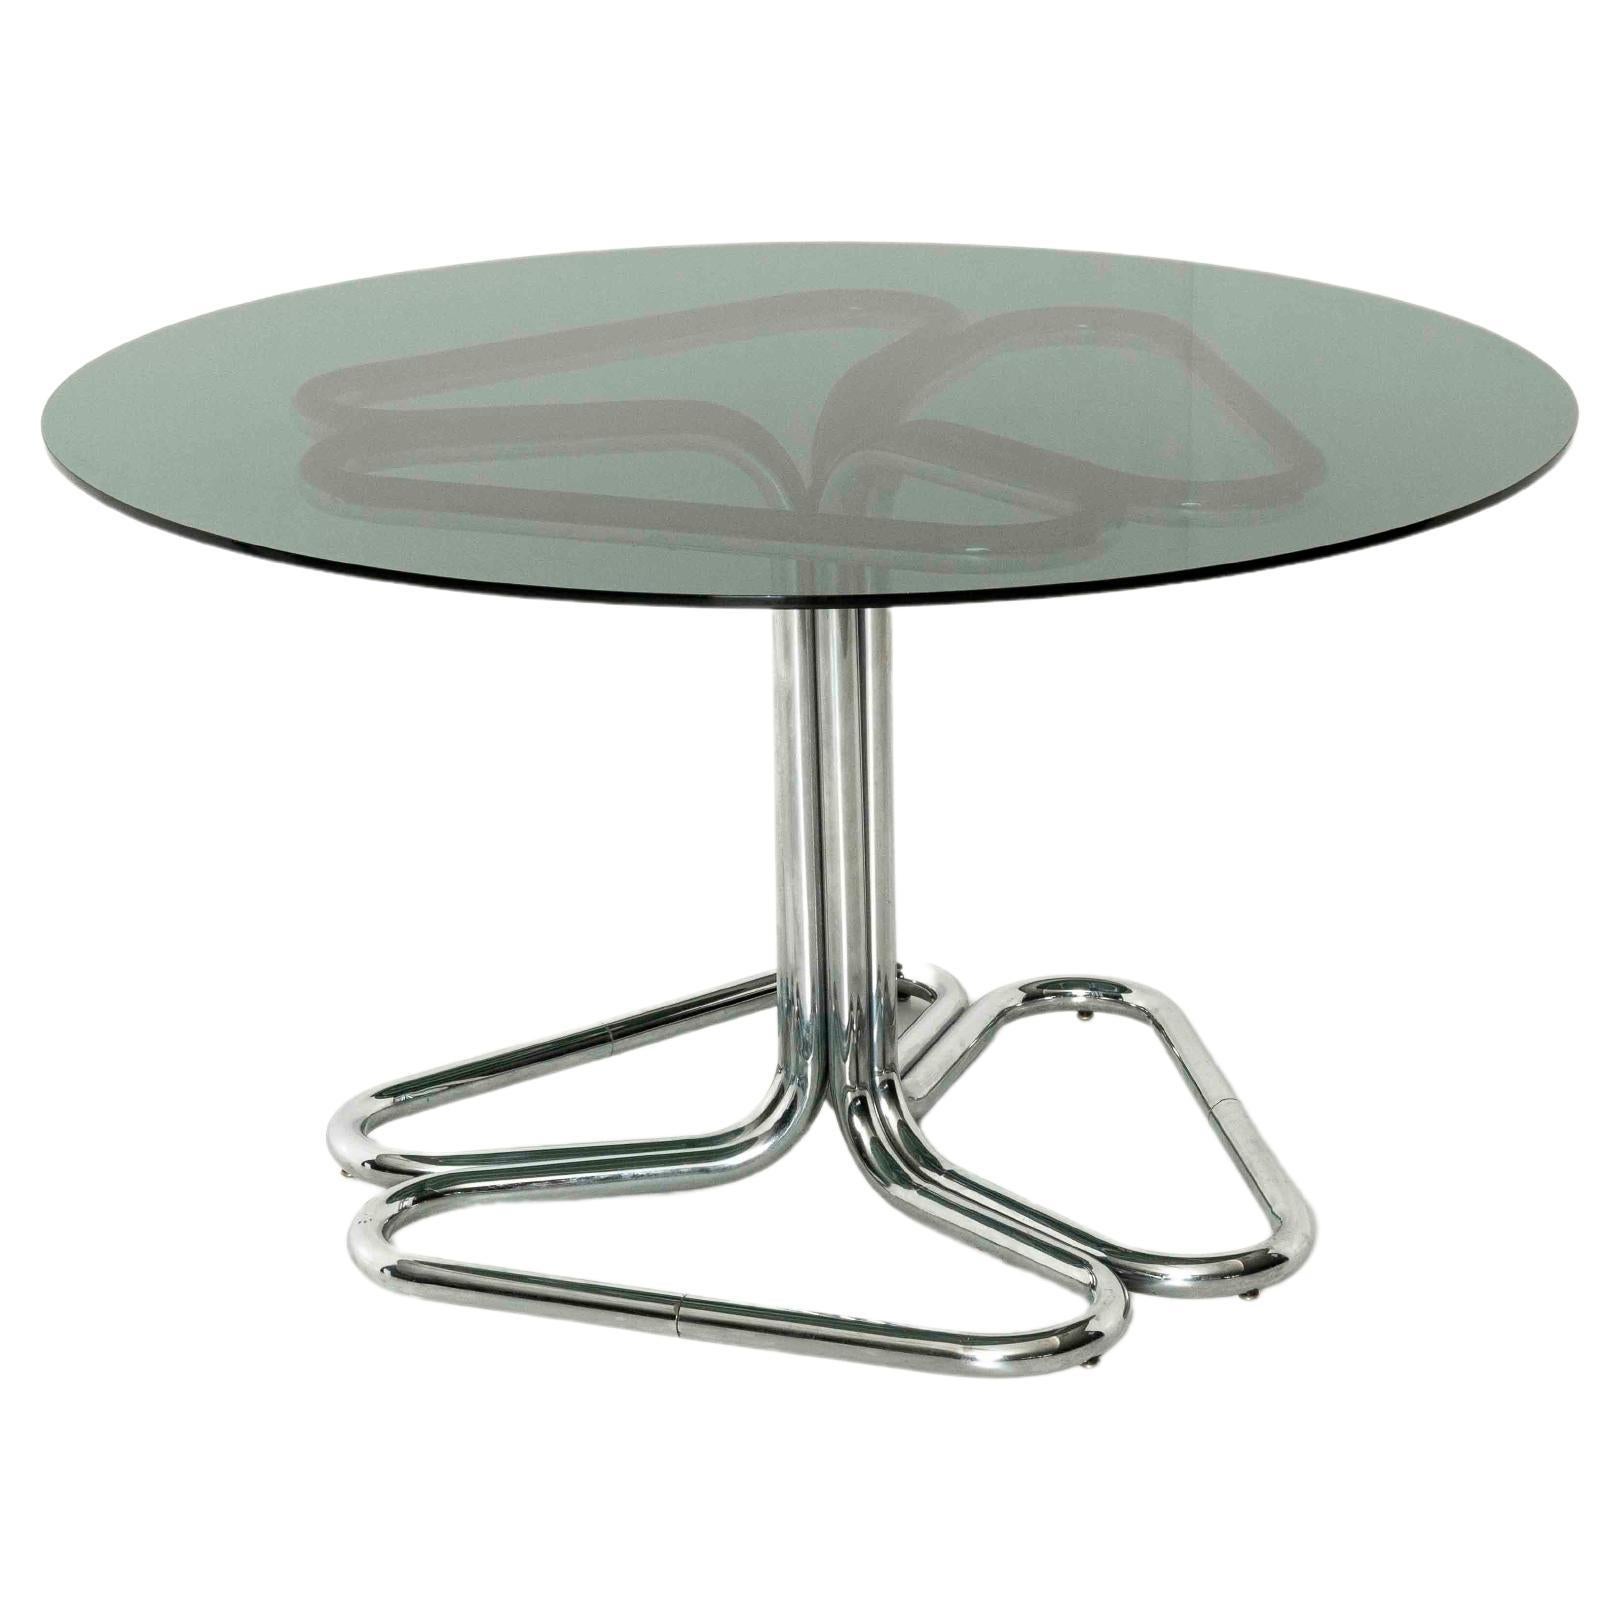 Giotto Stoppino Dining Room Tables